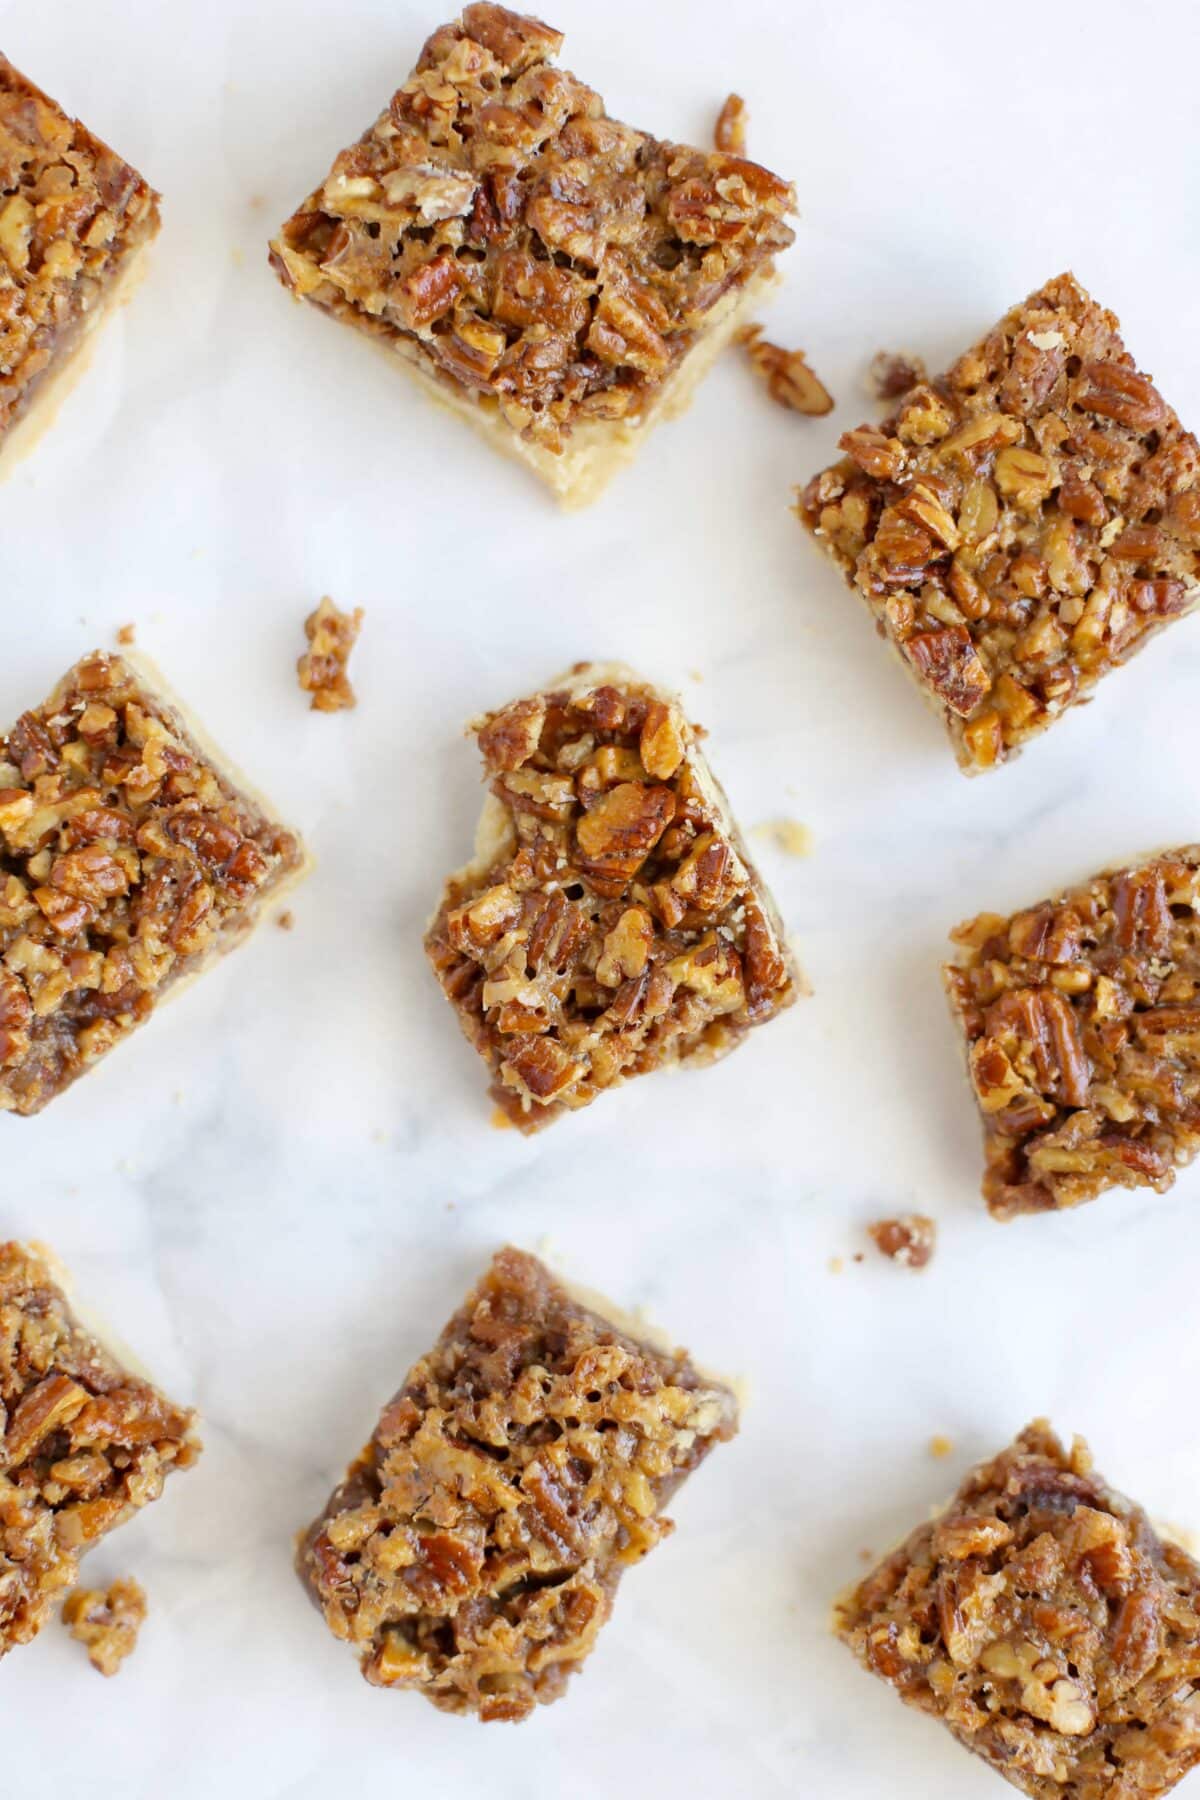 Pecan Pie Bars cut into squares and scattered on a sheet of white parchment paper.